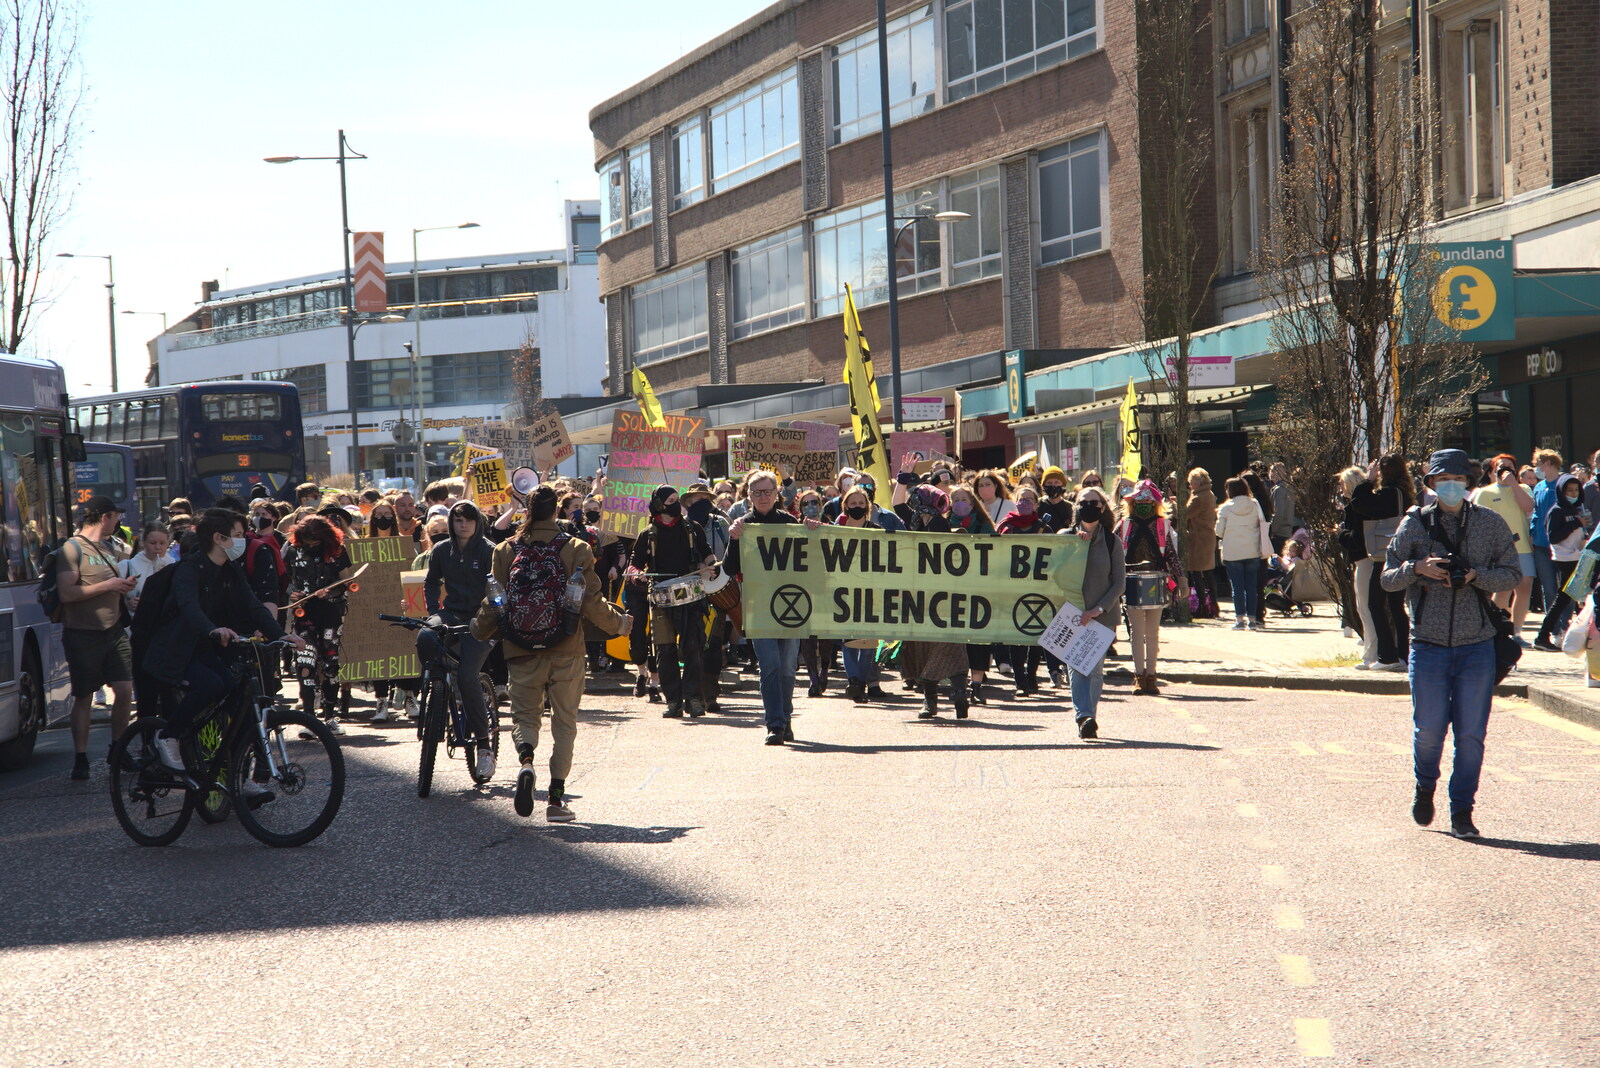 The demo moves down from the roundabout from The Death of Debenhams, Rampant Horse Street, Norwich, Norfolk - 17th April 2021